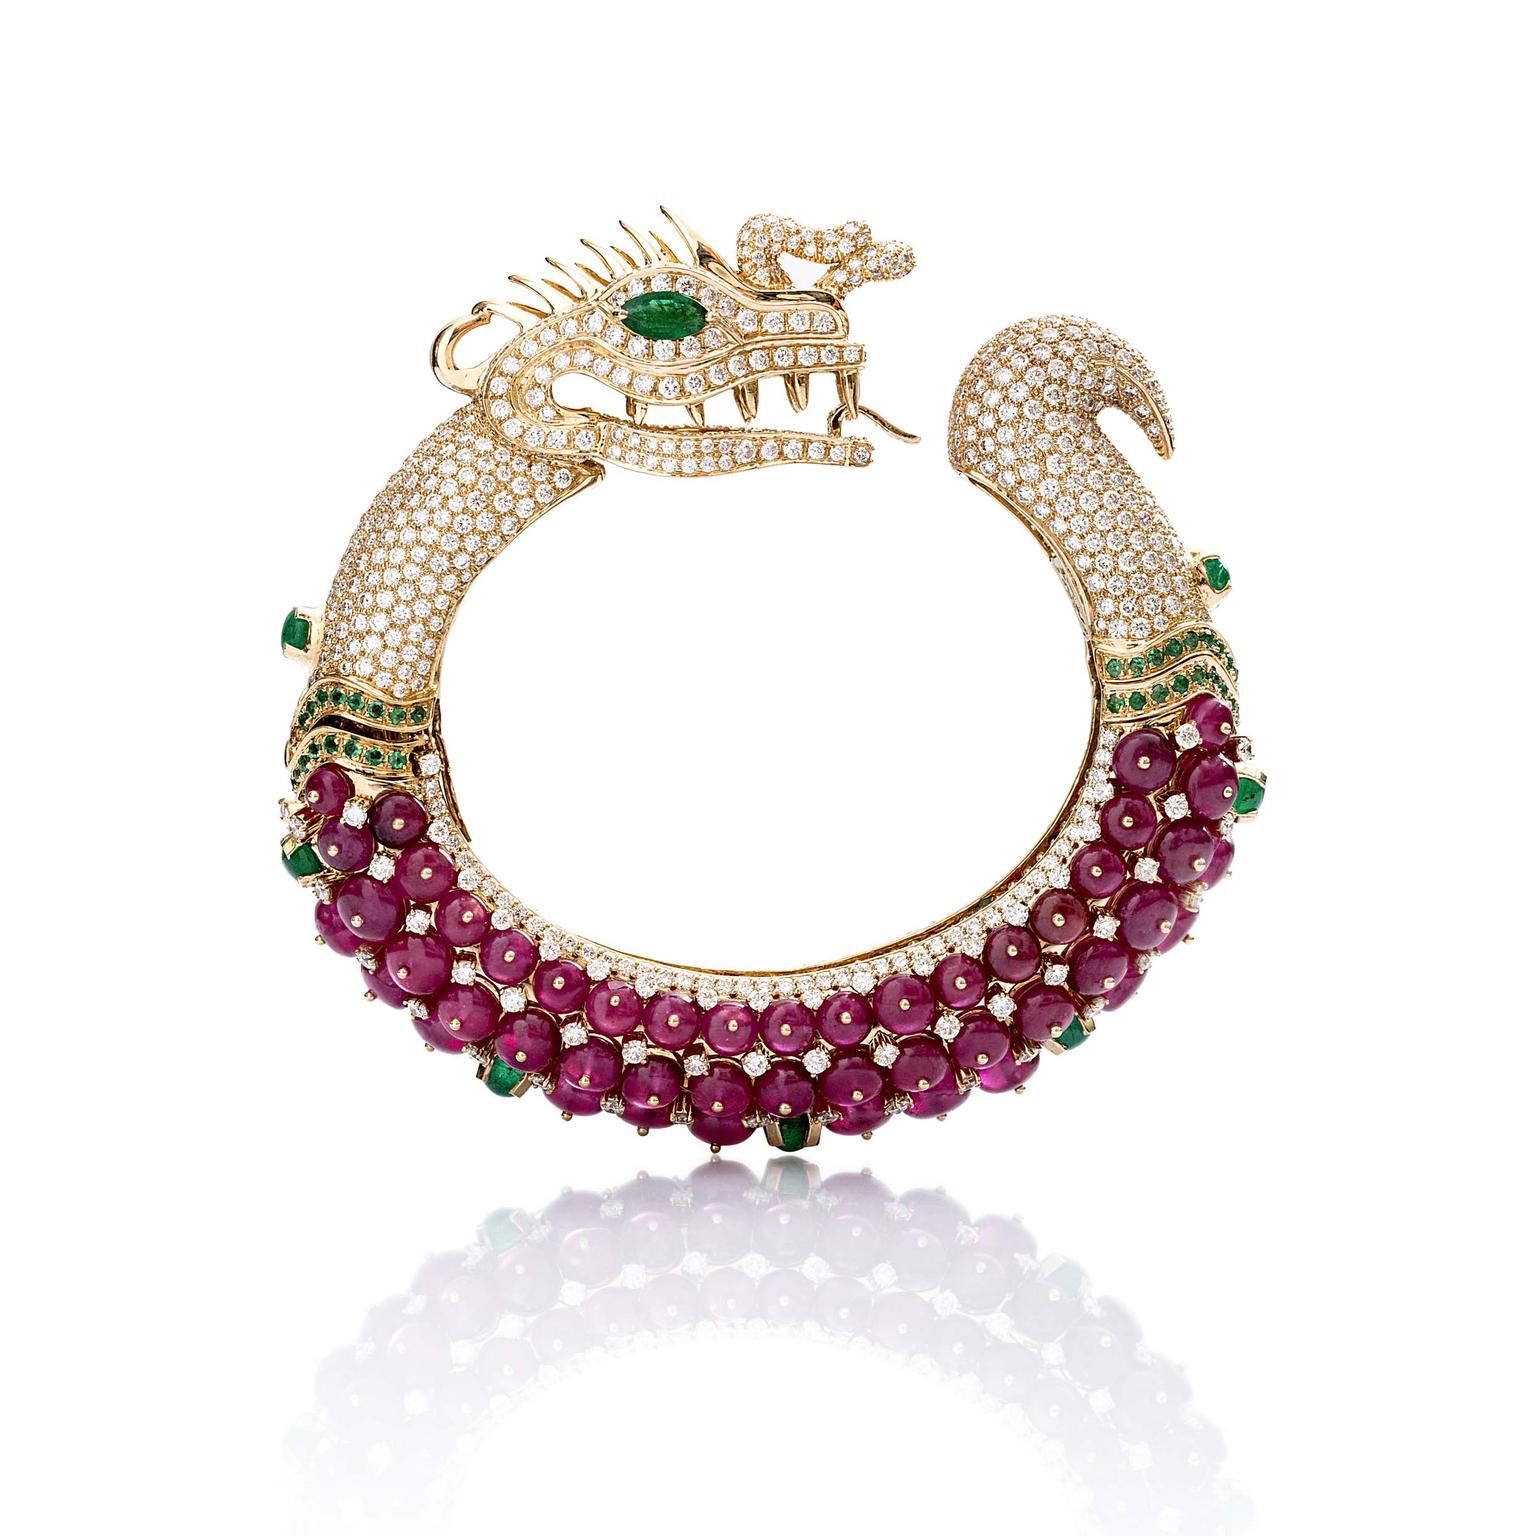 Le Jardin Exotique: a colourful new collection of Farah Khan jewellery for summer